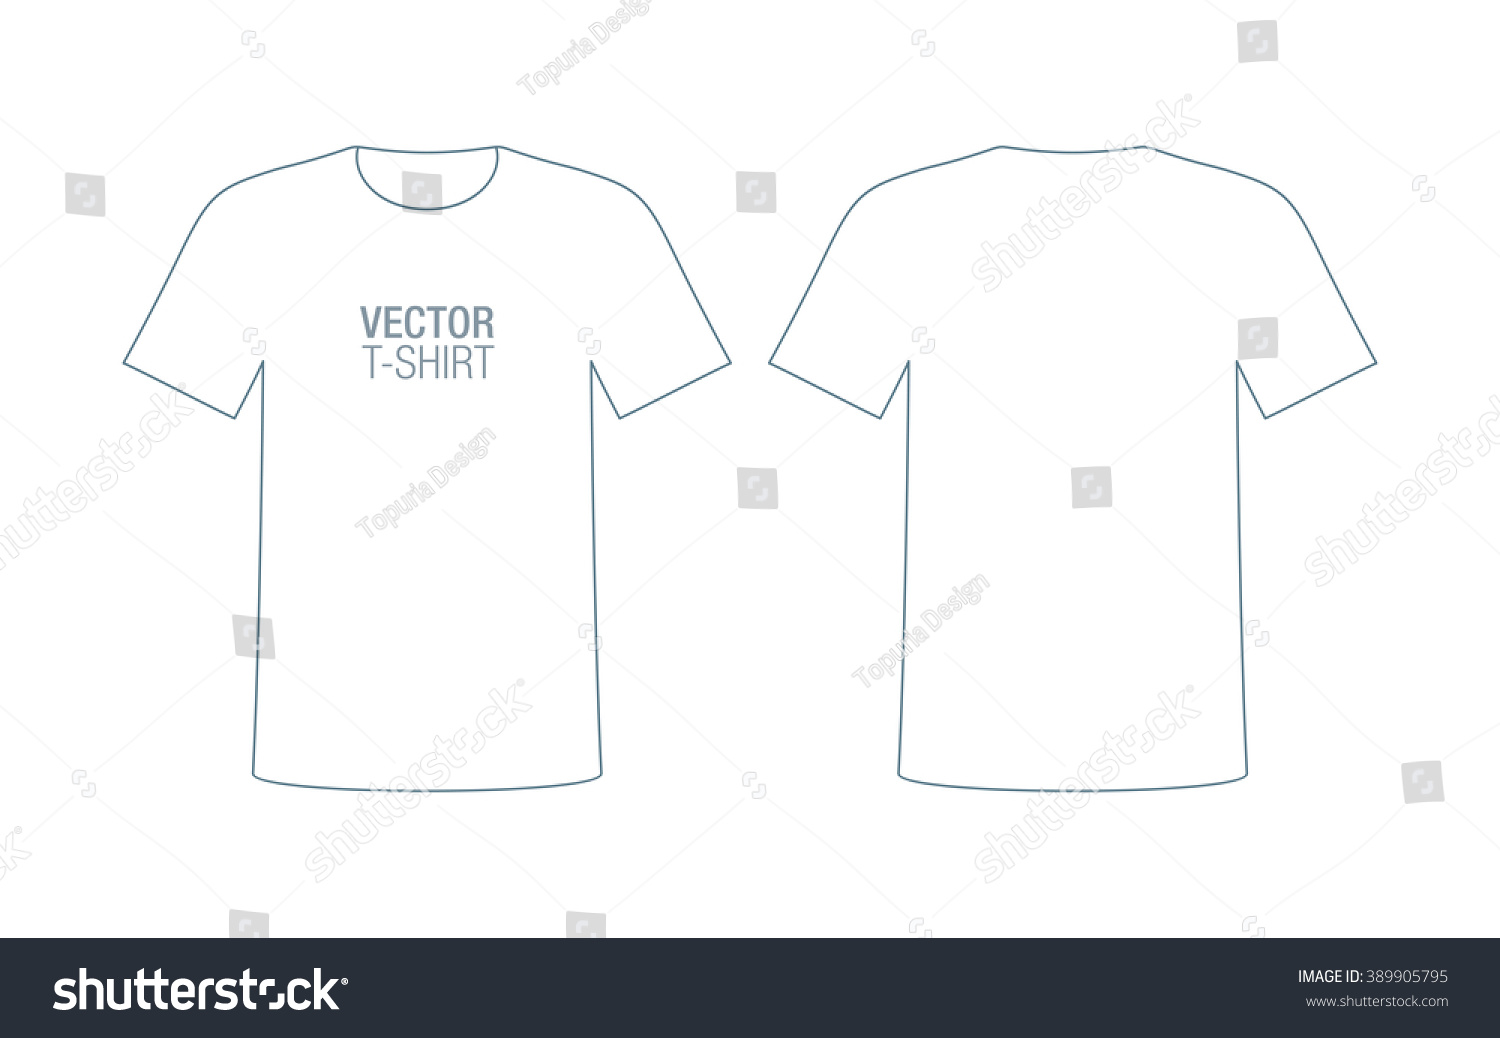 483,019 T Shirt Drawing Images, Stock Photos & Vectors | Shutterstock